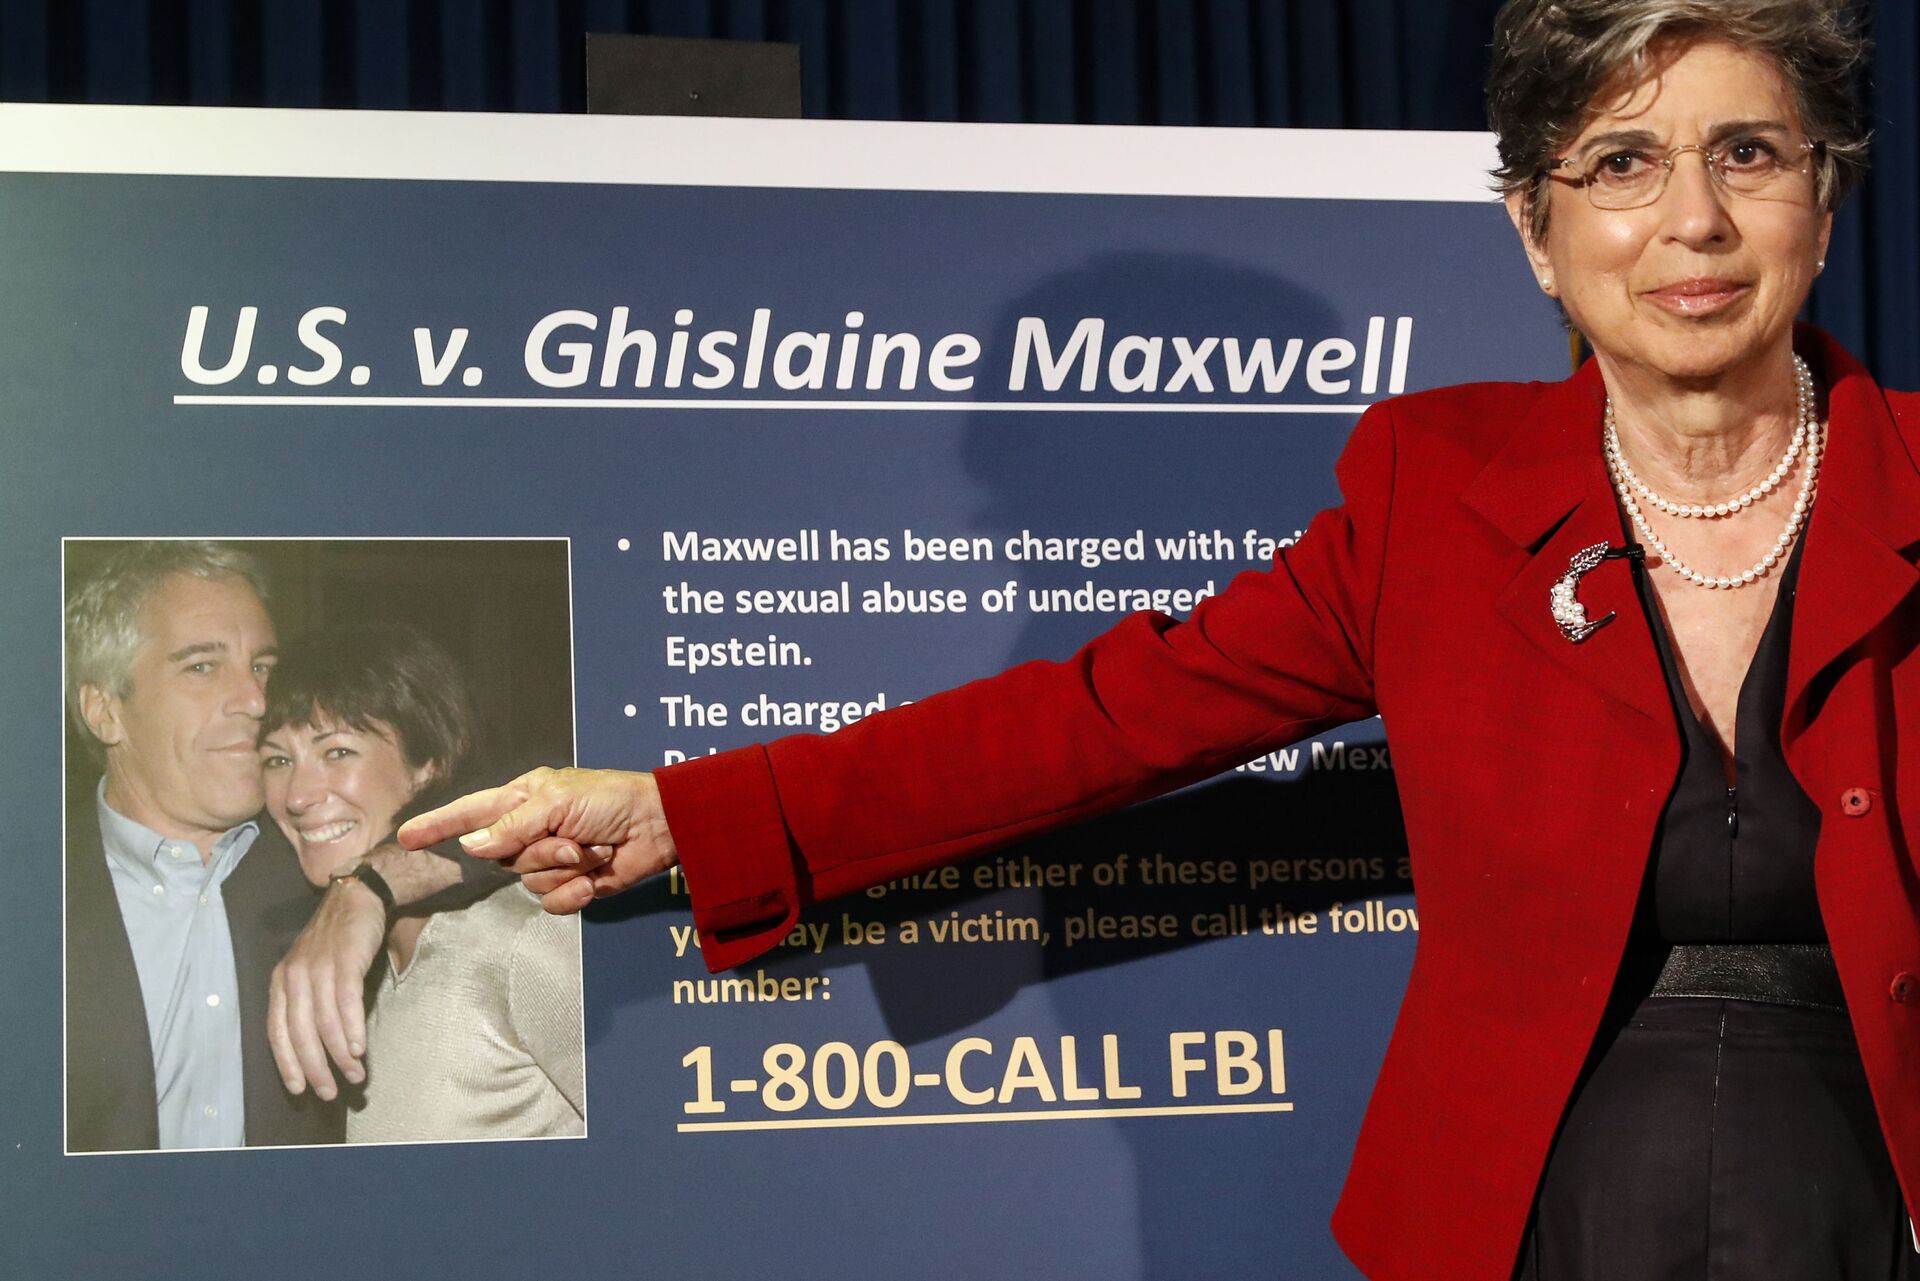 In this Thursday, July 2, 2020, file photo, Audrey Strauss, Acting United States Attorney for the Southern District of New York, gestures as she speaks during a news conference to announce charges against Ghislaine Maxwell for her alleged role in the sexual exploitation and abuse of multiple minor girls by Jeffrey Epstein, in New York - Sputnik International, 1920, 01.12.2021